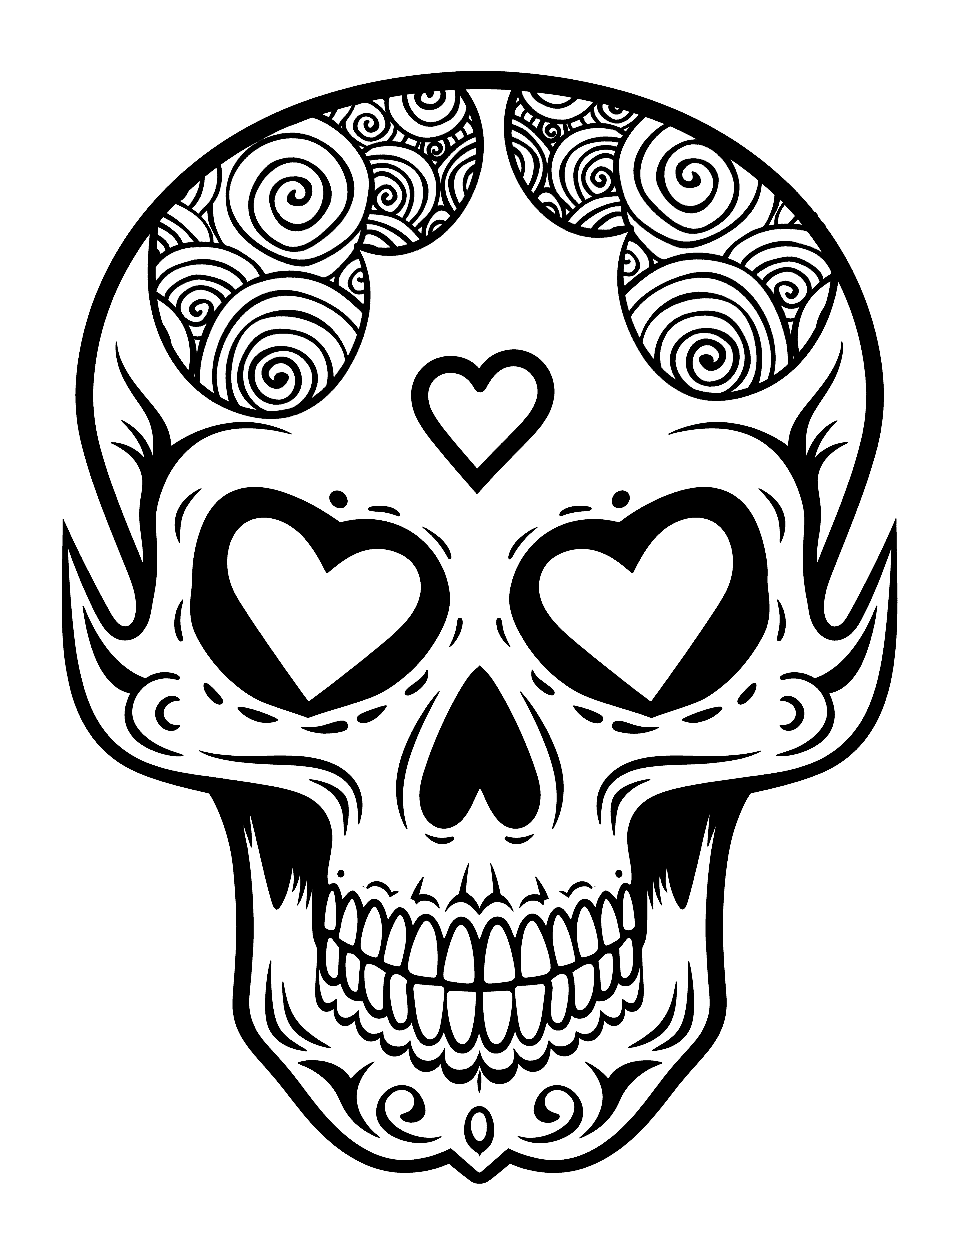 Love Heart Skull Coloring Page - A skull with heart-shaped eye sockets and a heart on the forehead.